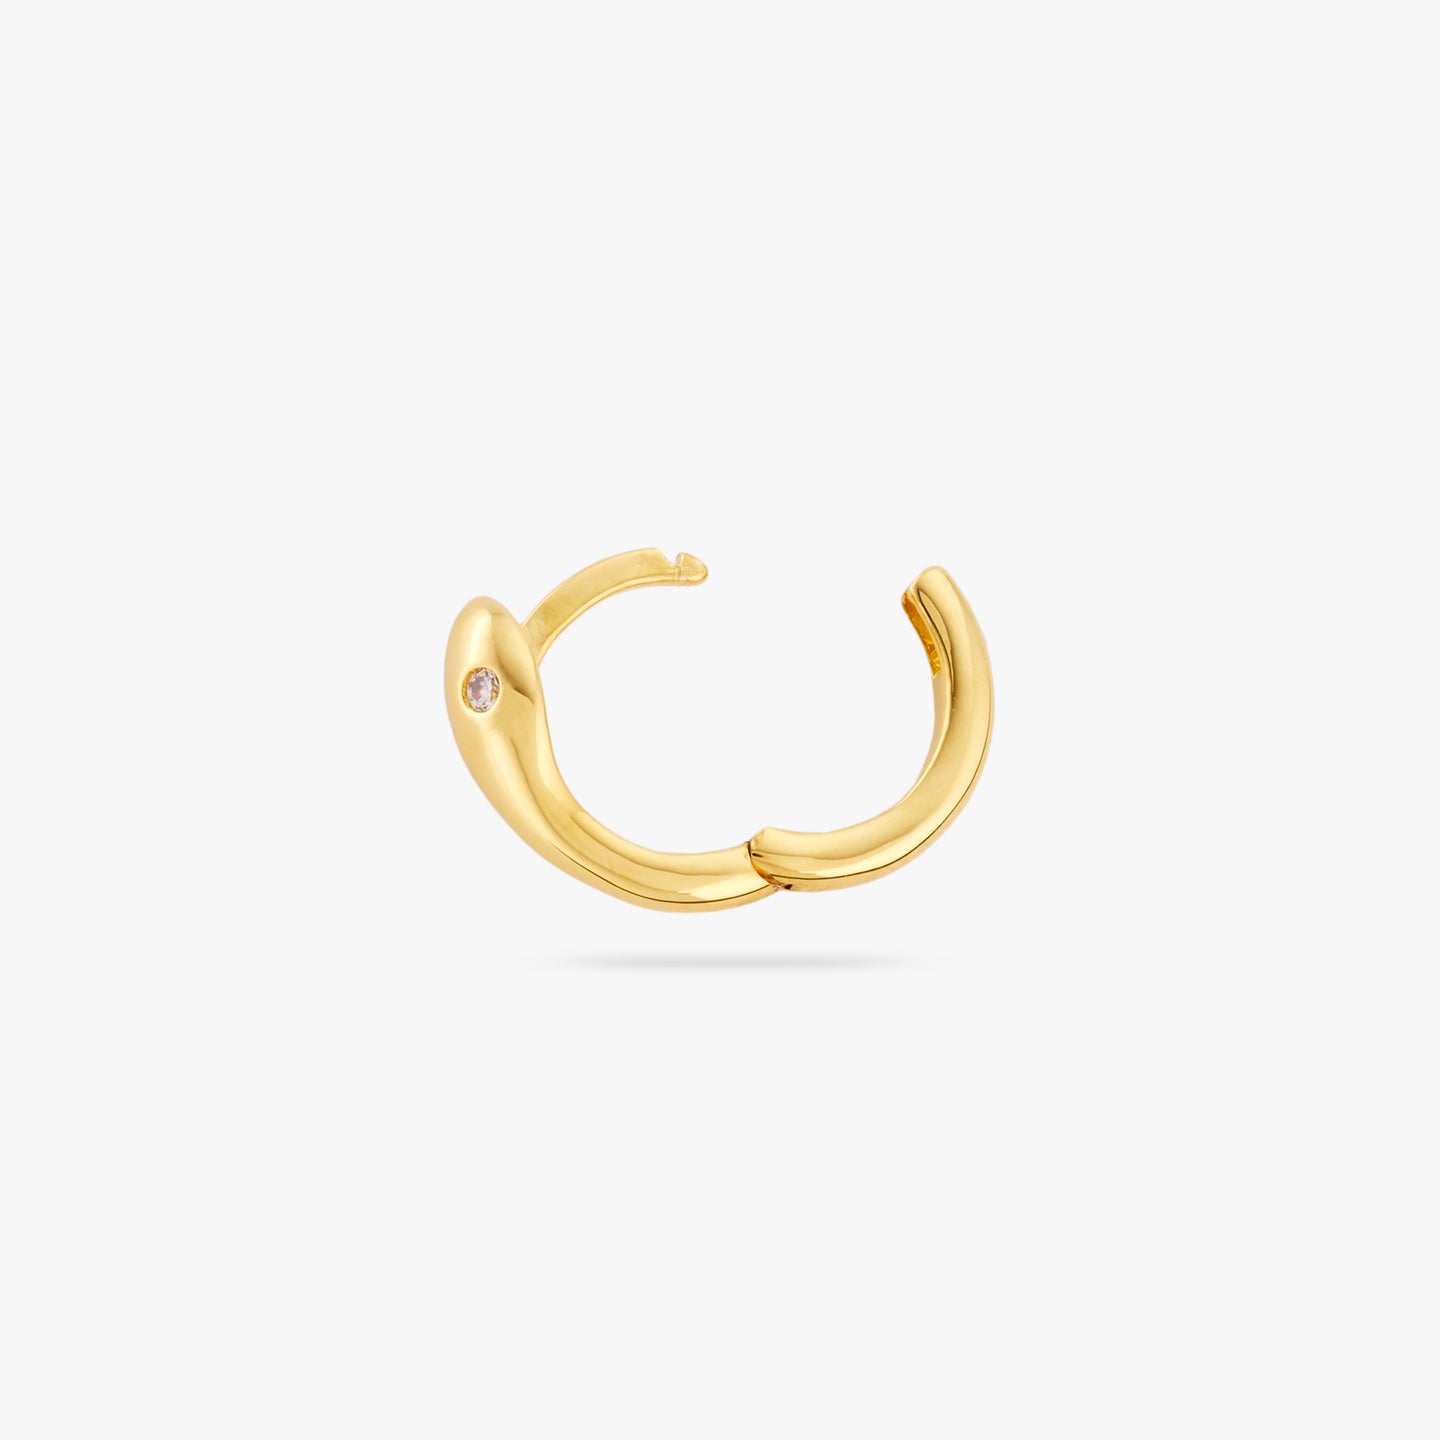 This is a gold serpent shaped huggie earring with a clear CZ eye and its clasp undone color:null|gold